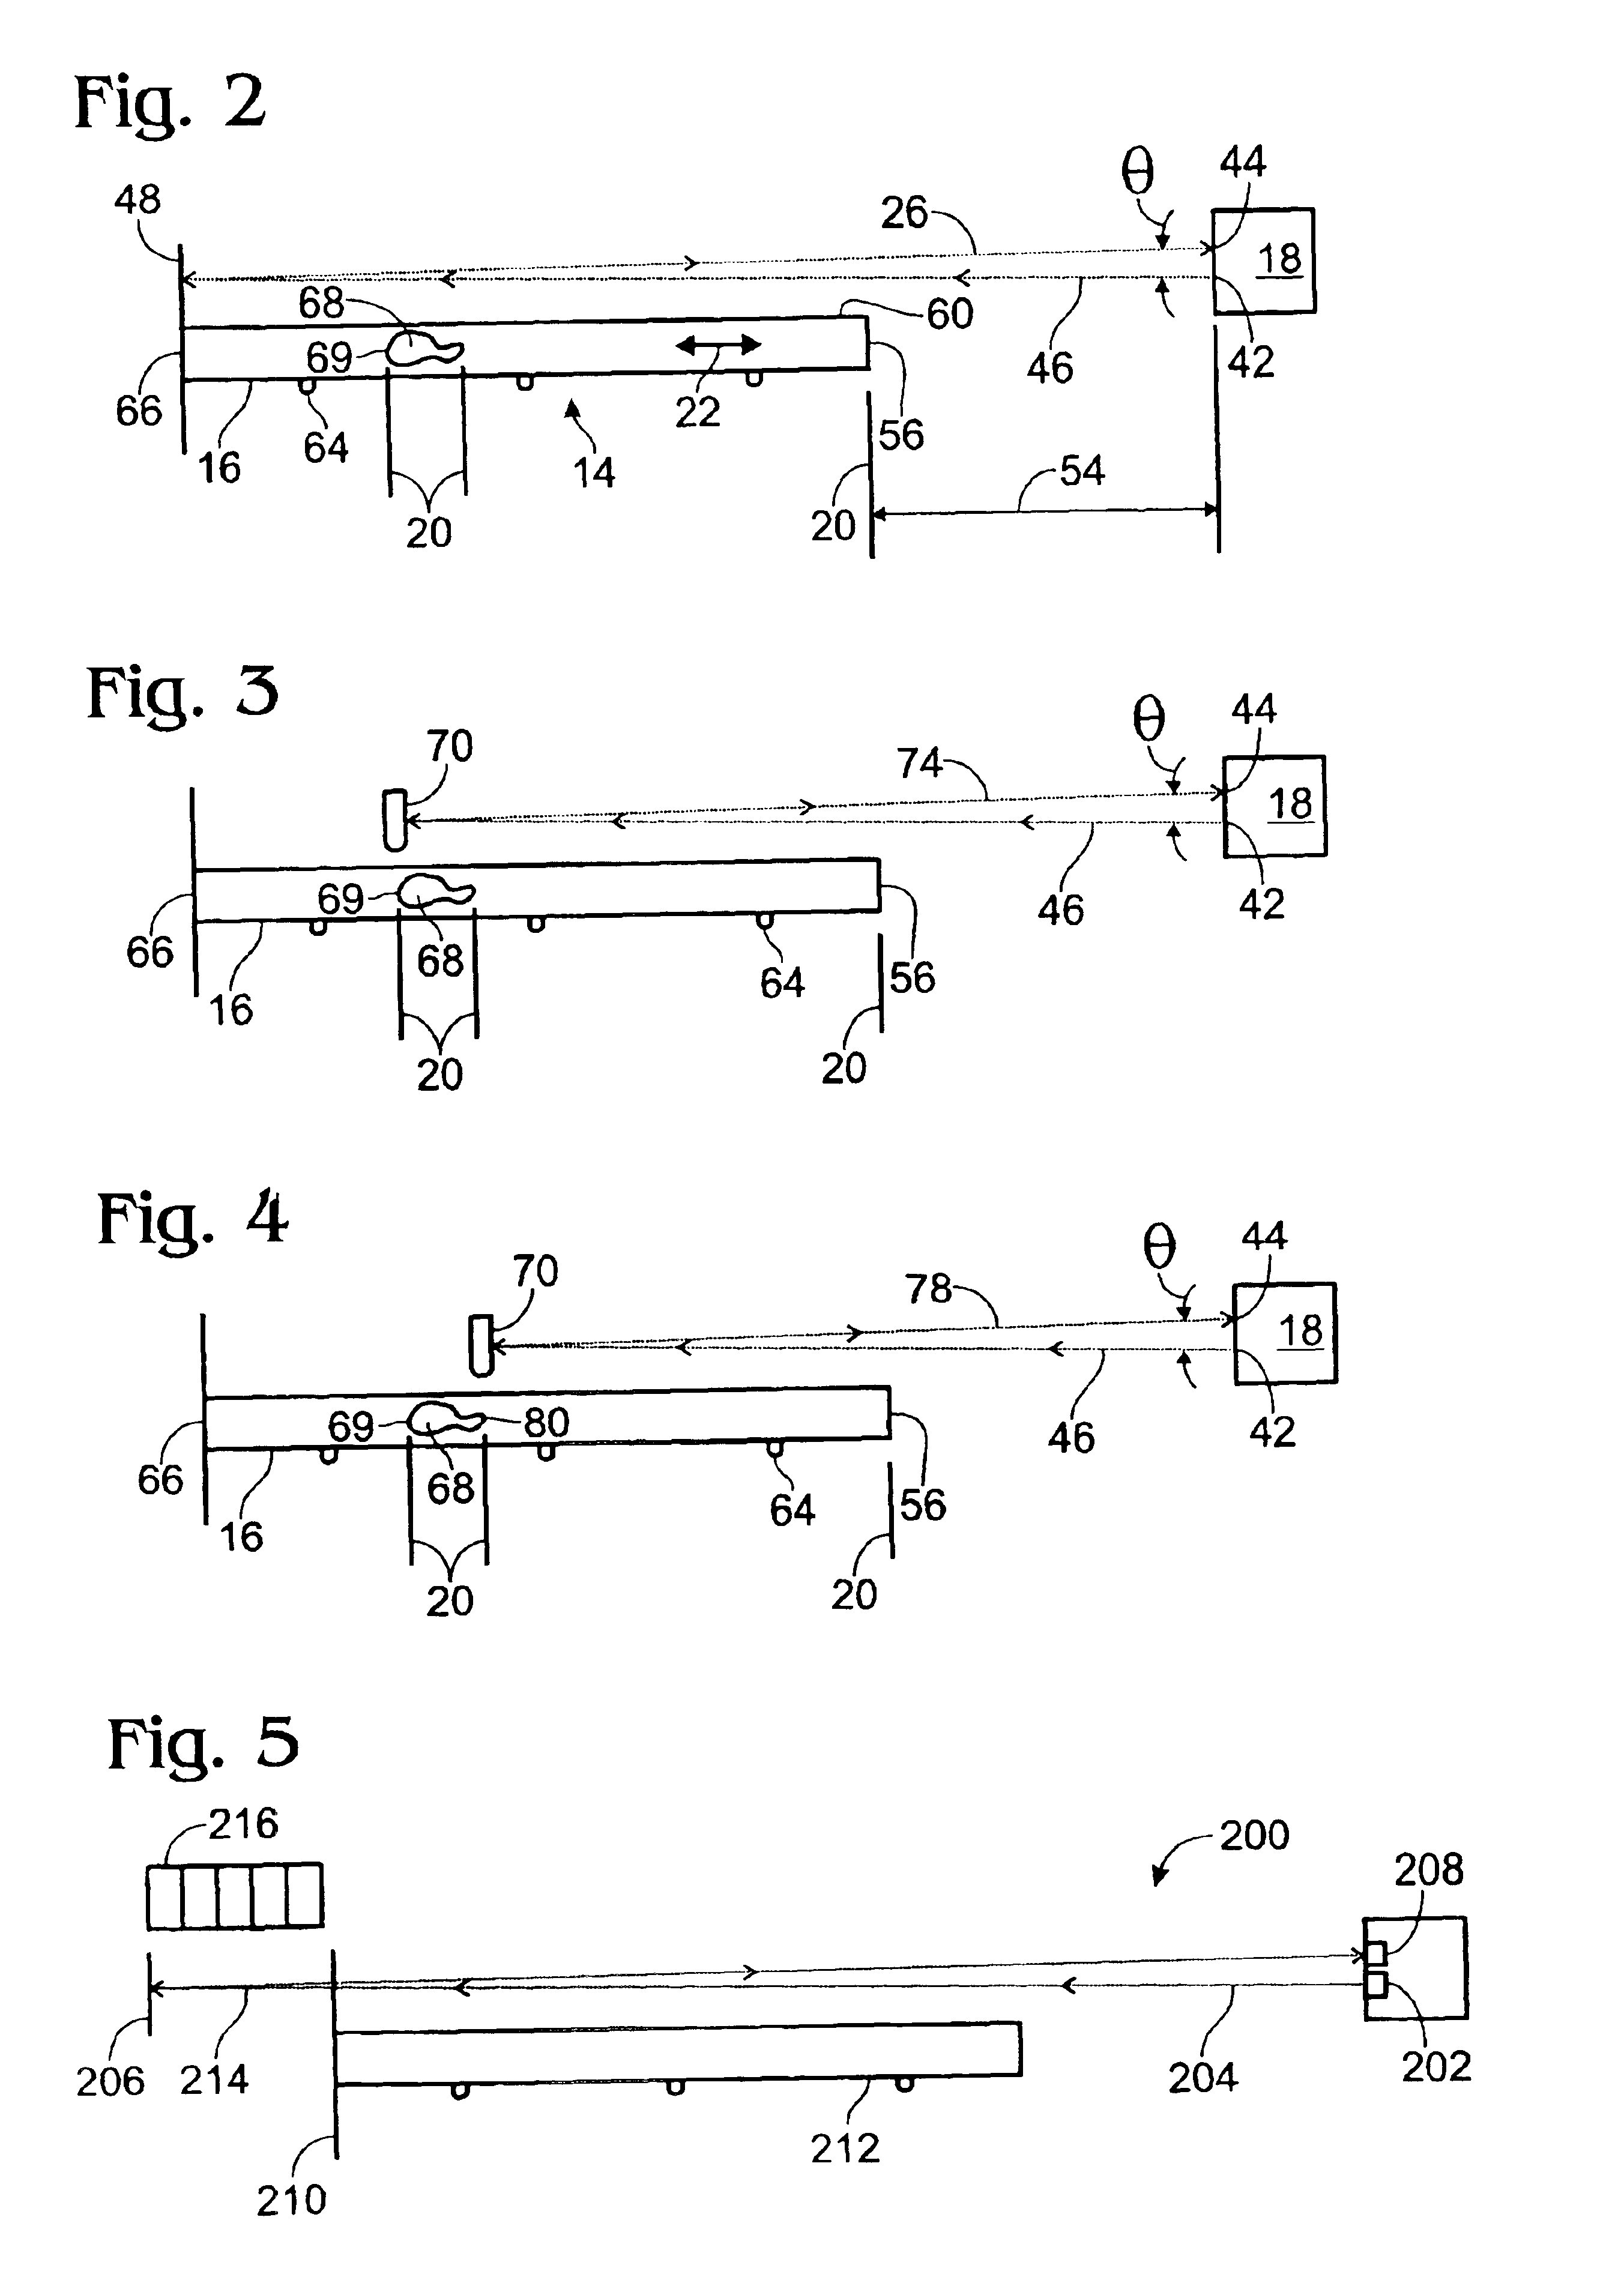 Systems and methods of processing materials